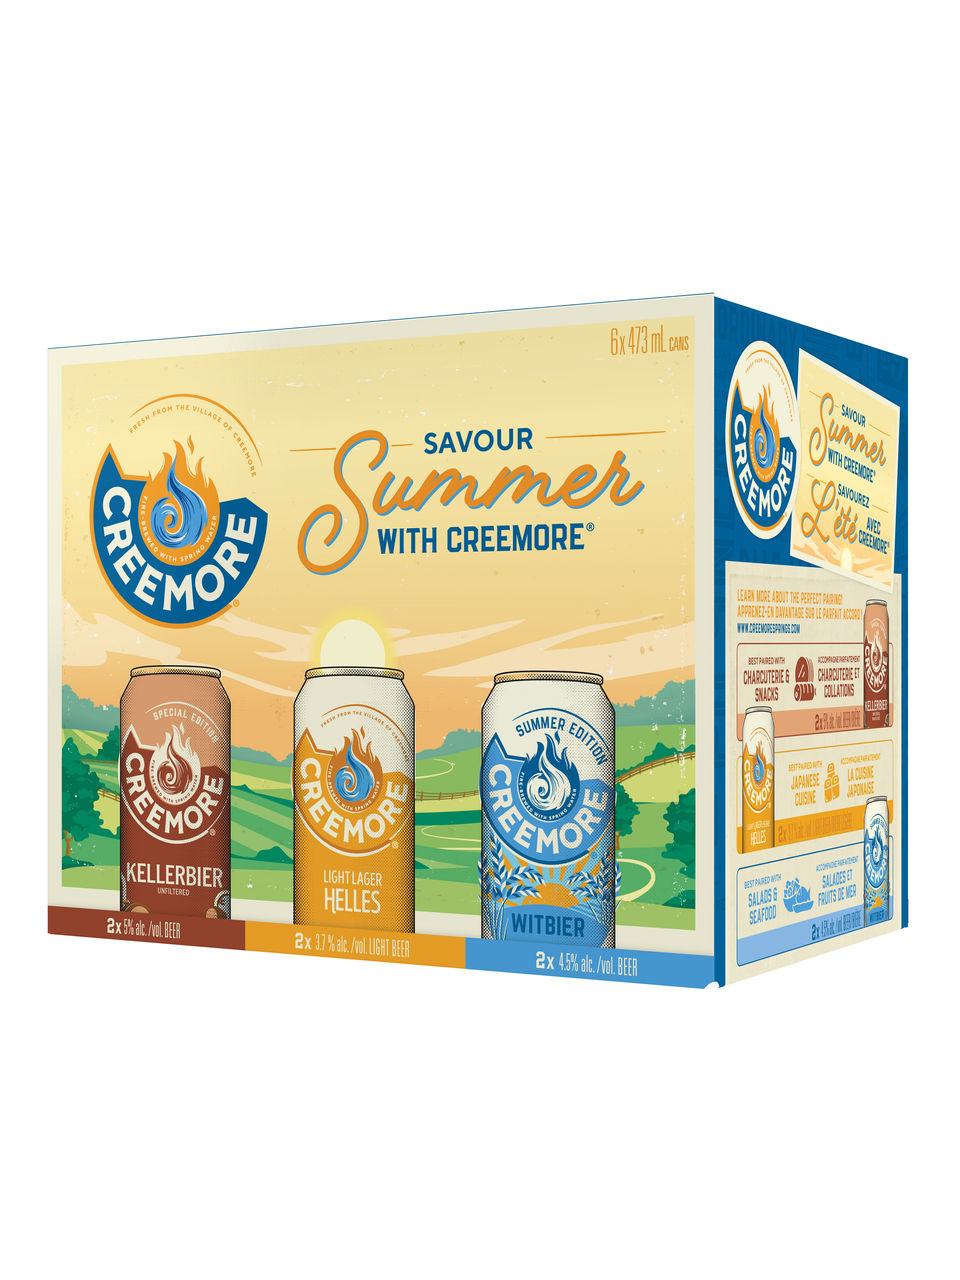 Creemore Springs Savour Summer Collection 6 x 473 ml can